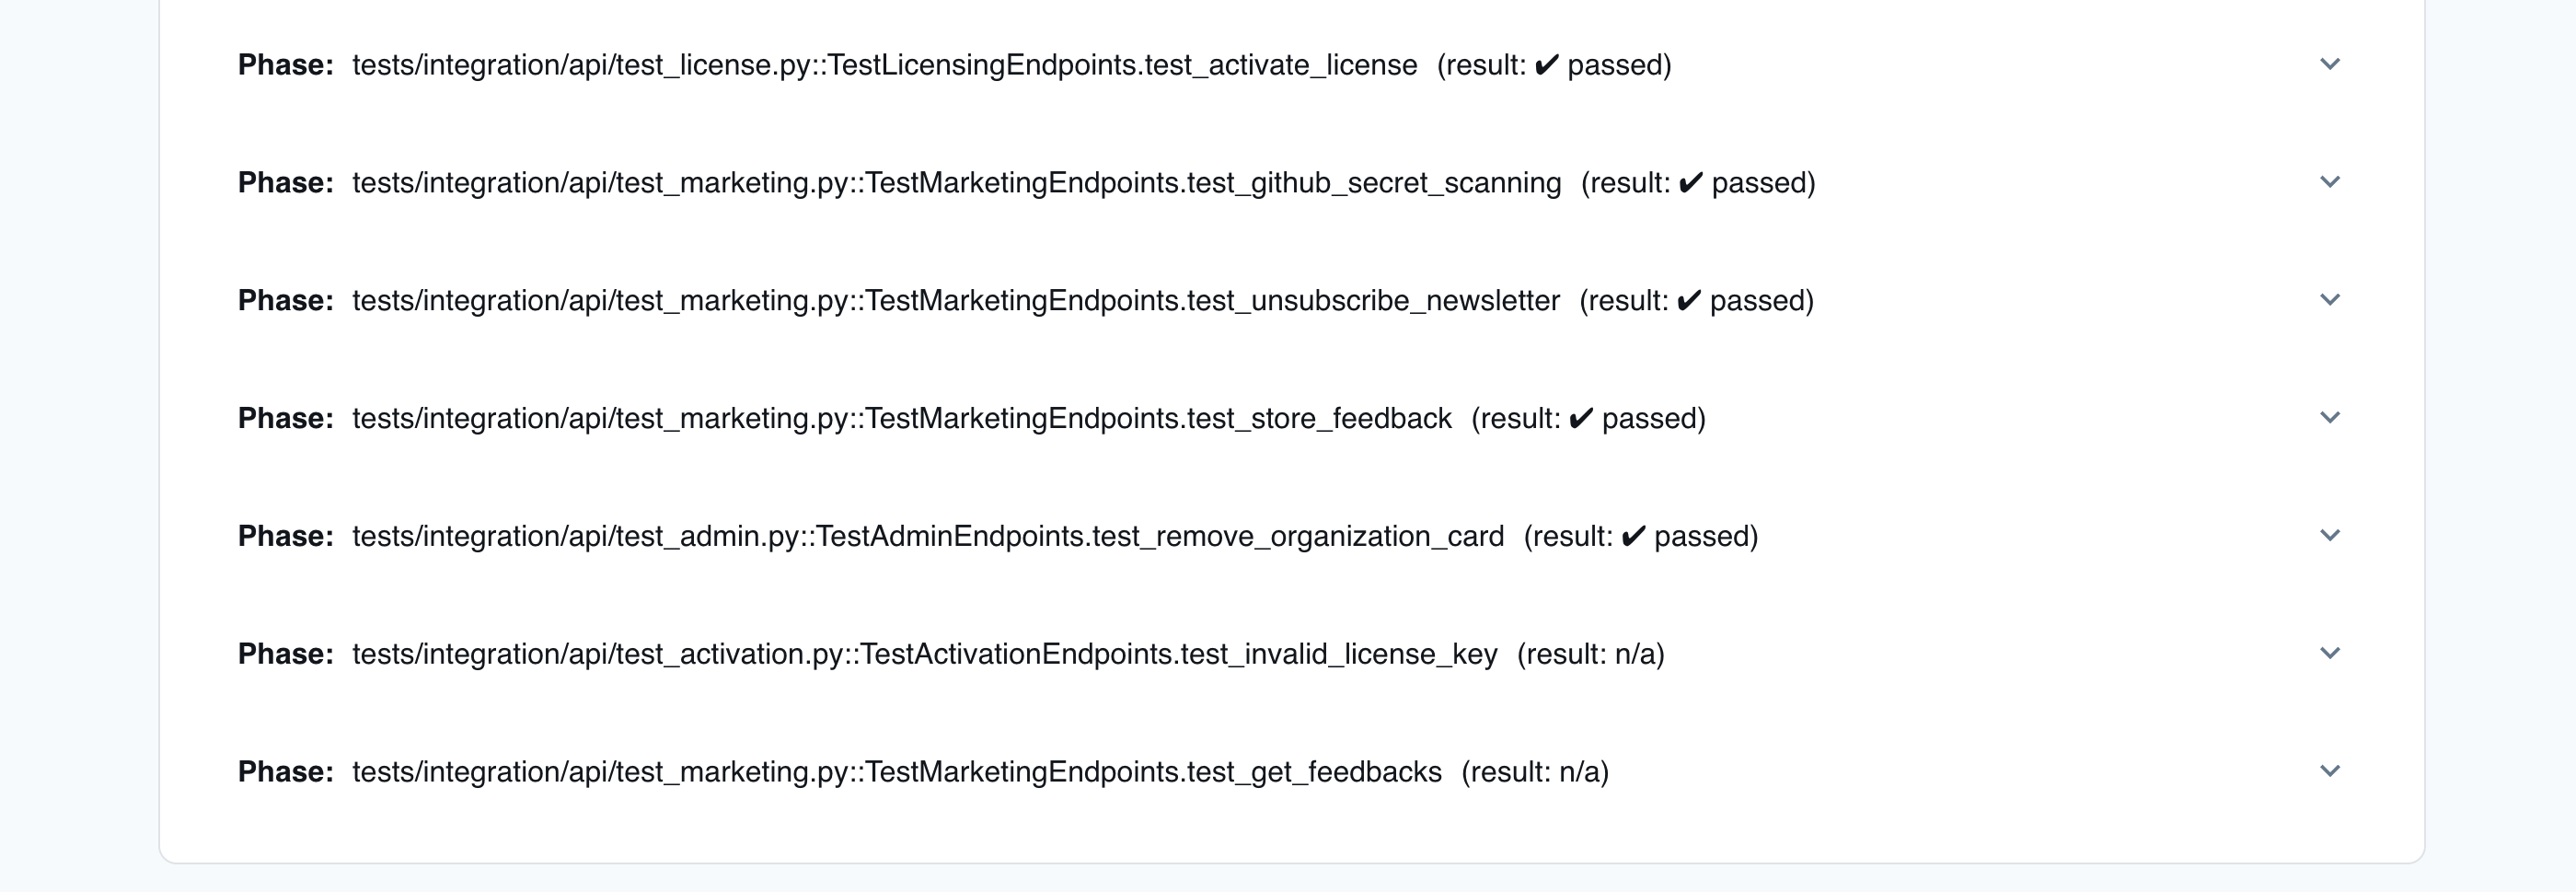 Request/Response traces from the application tests